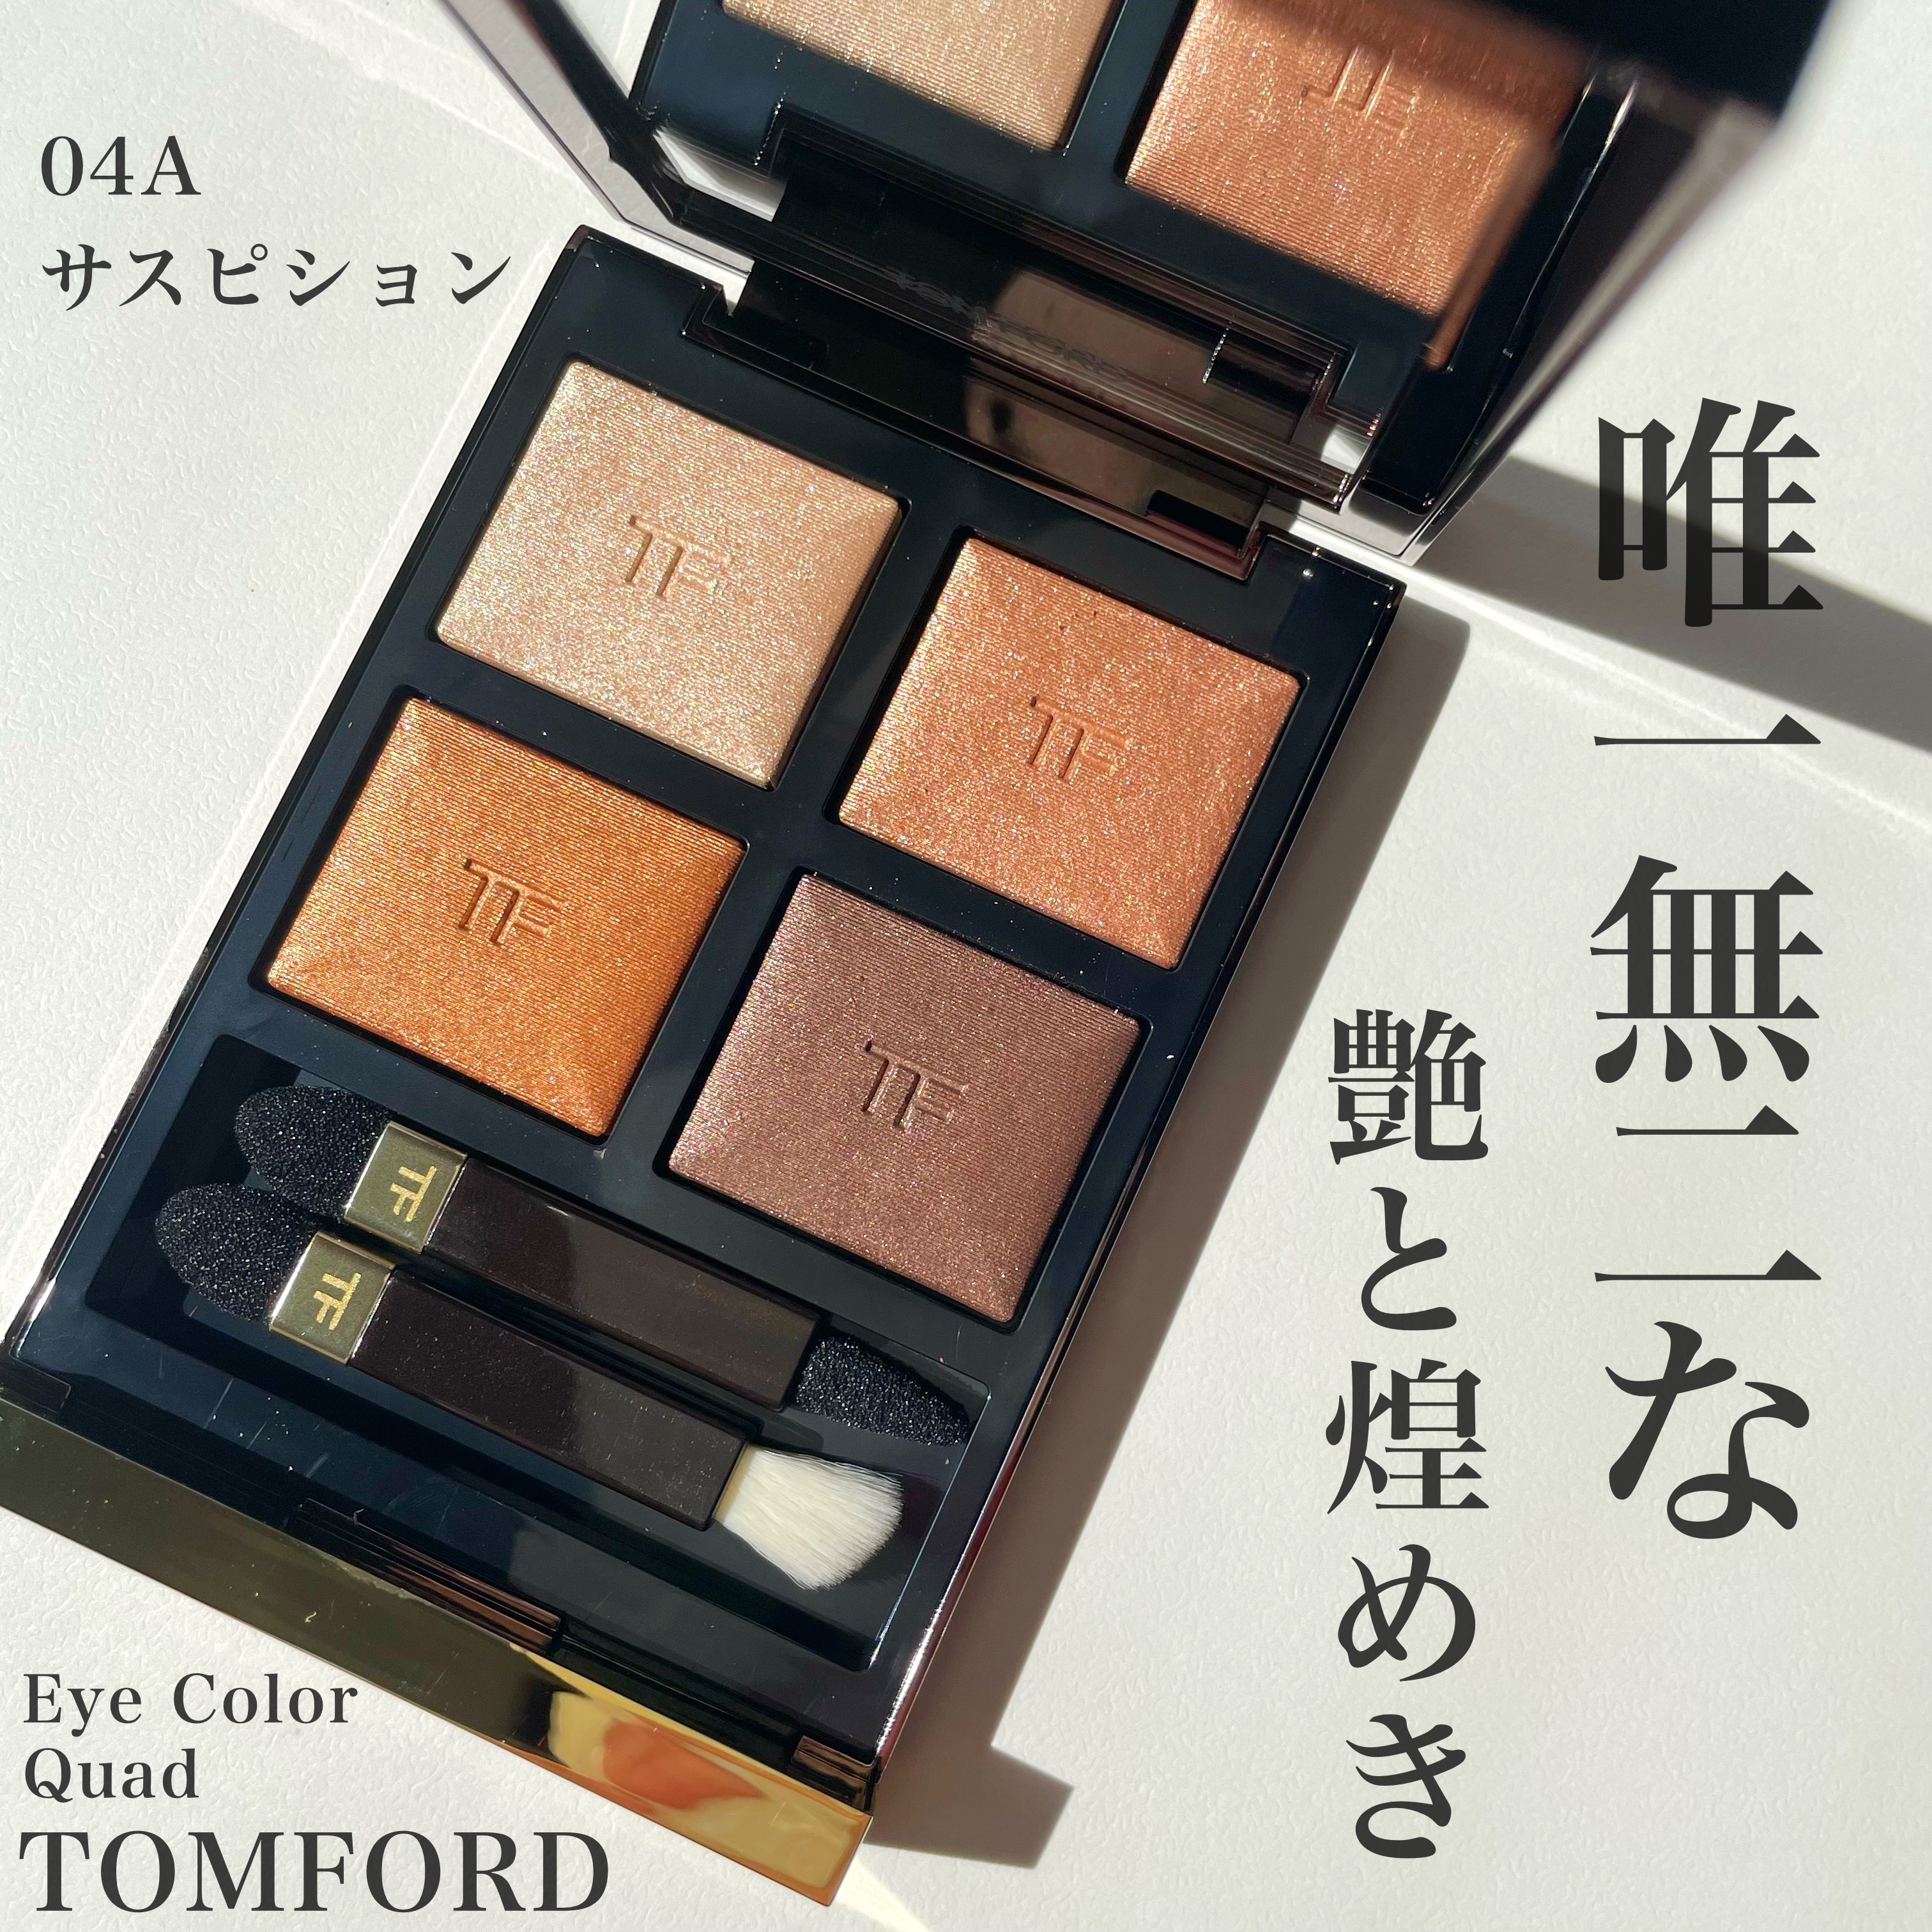 TOMFORD アイカラークォード 04A サスピション』by Kei : TOM FORD 